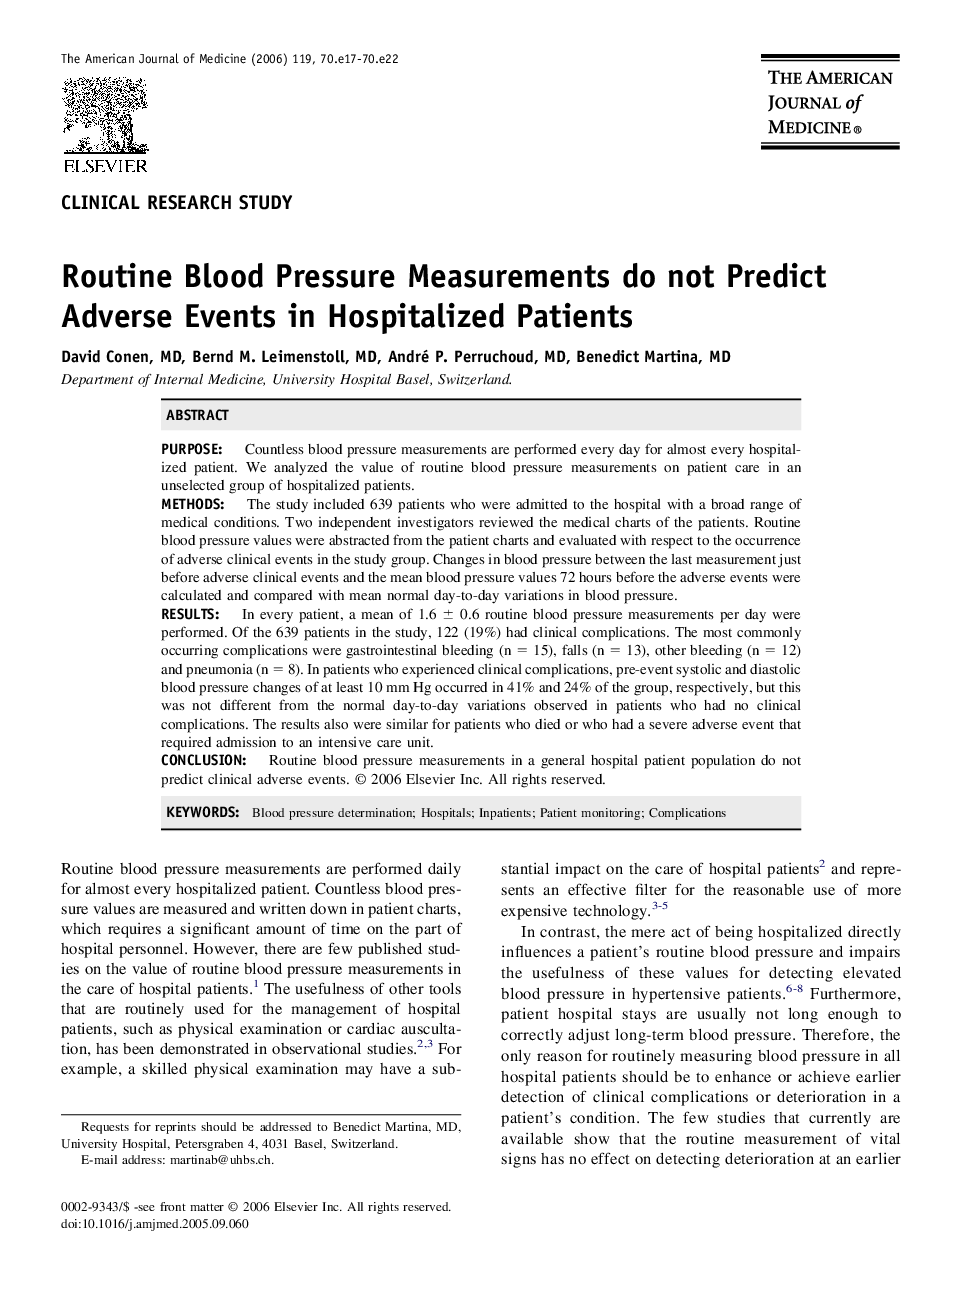 Routine Blood Pressure Measurements Do Not Predict Adverse Events in Hospitalized Patients